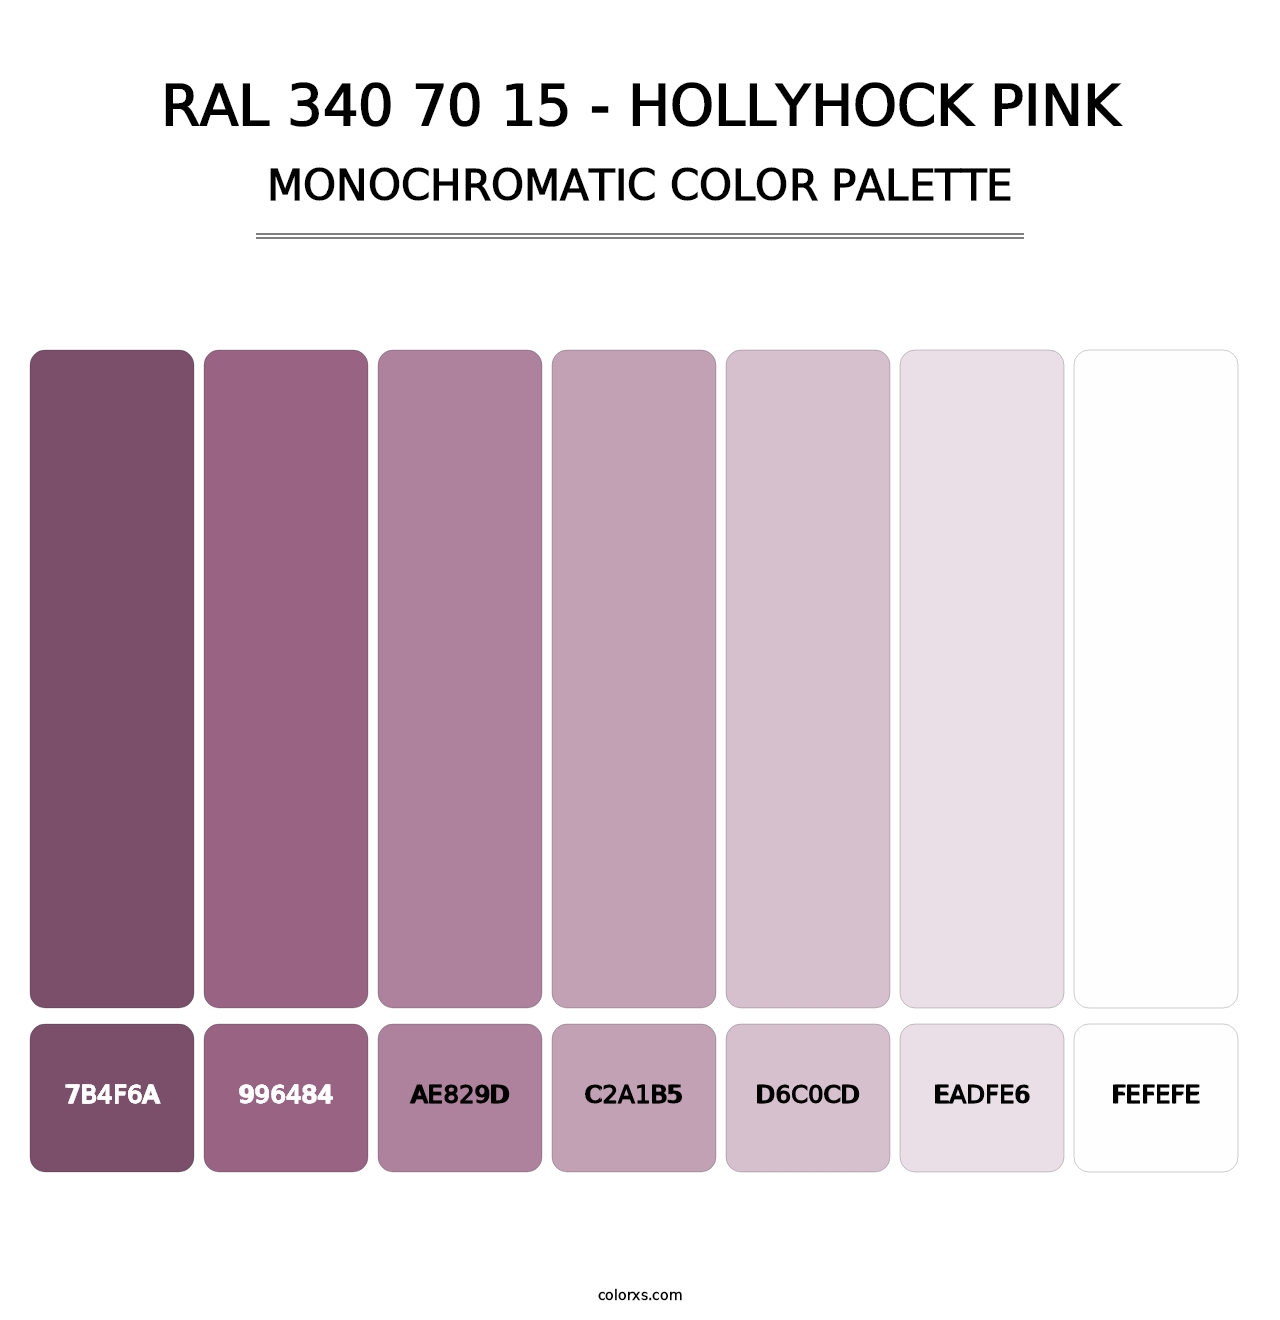 RAL 340 70 15 - Hollyhock Pink - Monochromatic Color Palette